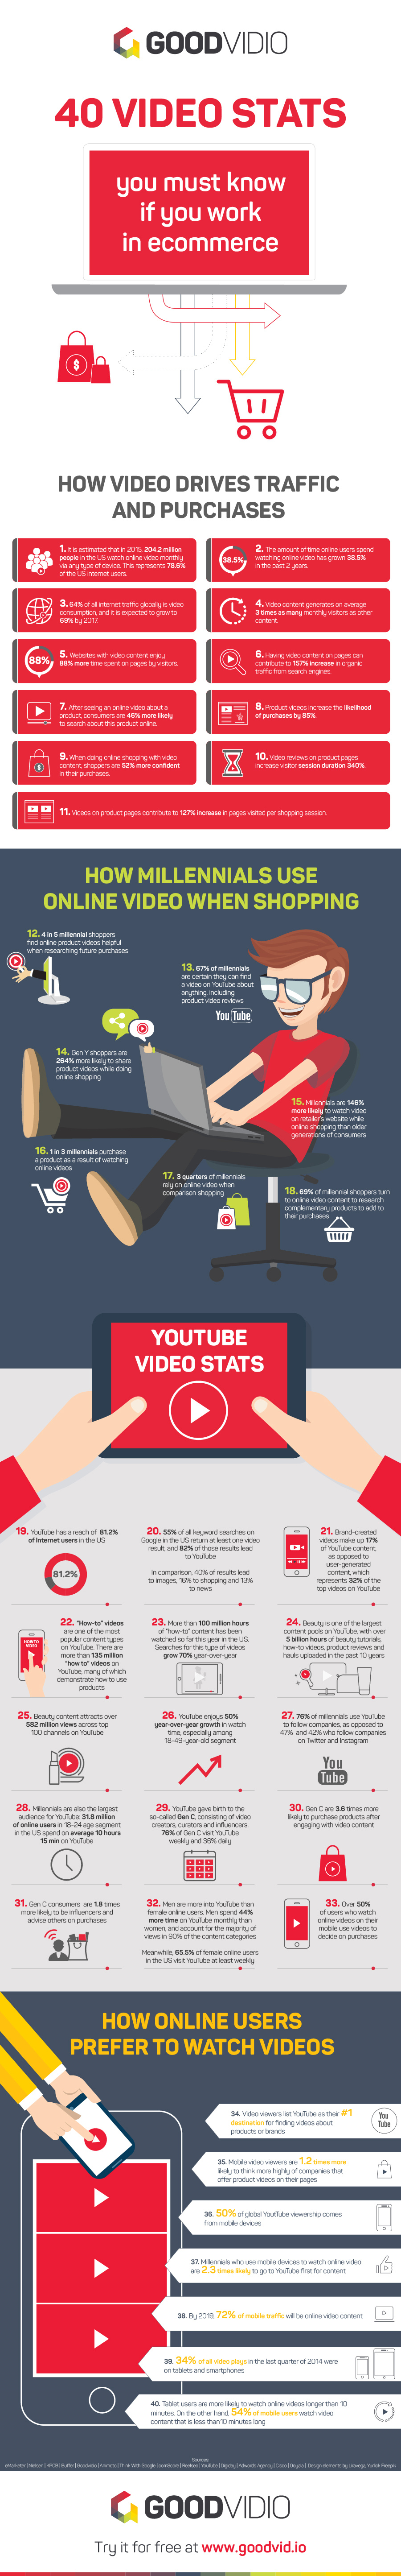 40 Video Stats You Should Know If You Work in E-Commerce [Infographic]